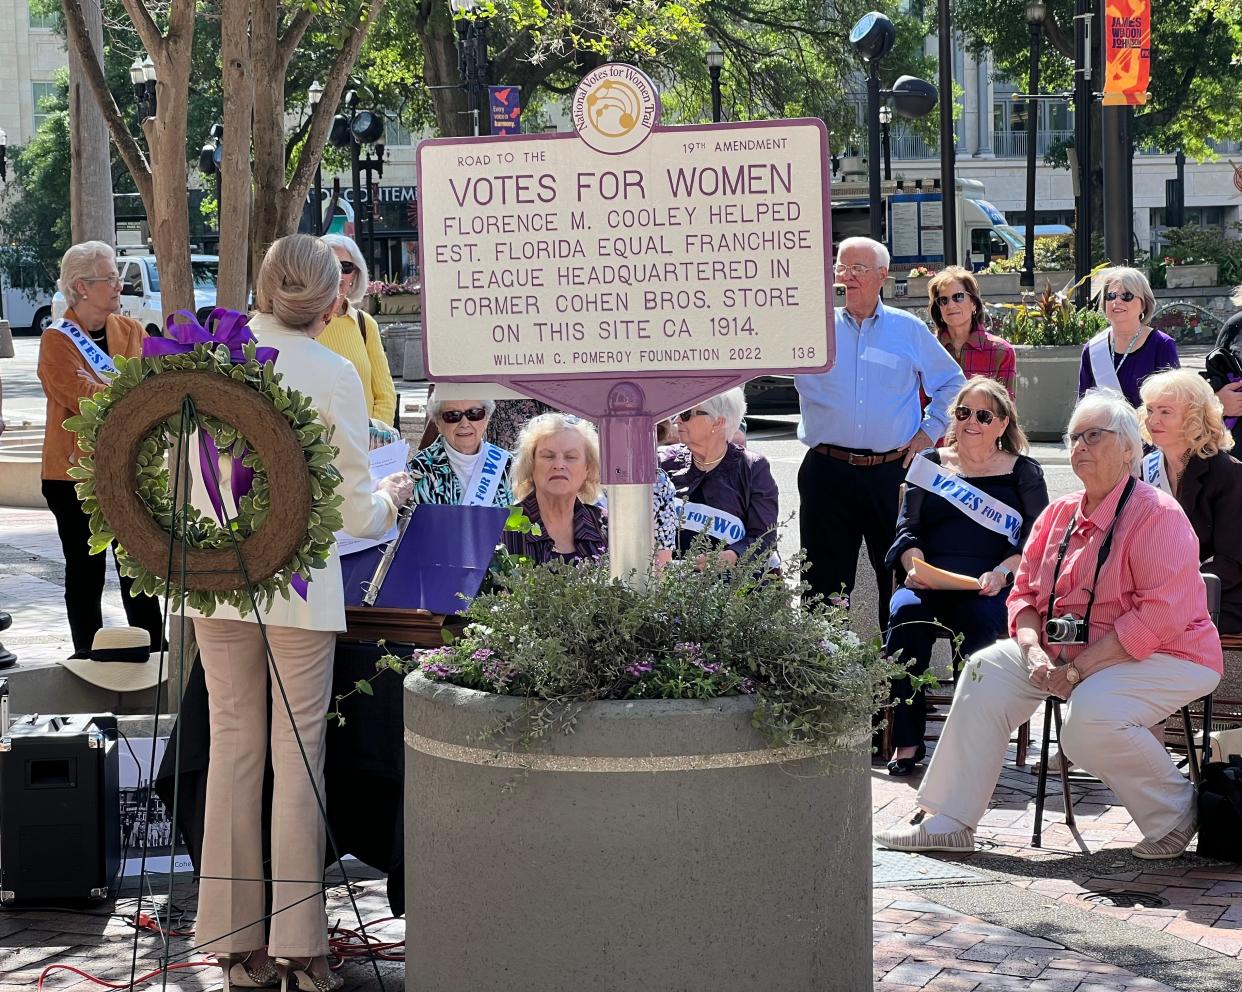 The Women's Club of Jacksonville unveiled a marker as part of the National Votes for Women Trail in front of City Hall Wednesday. The marker recognizes Florence Murphy Cooley for helping to establish the Florida Equal Franchise League — the first women's suffrage organization in Jacksonville — in the building, then Cohen Brothers department store, in 1914.